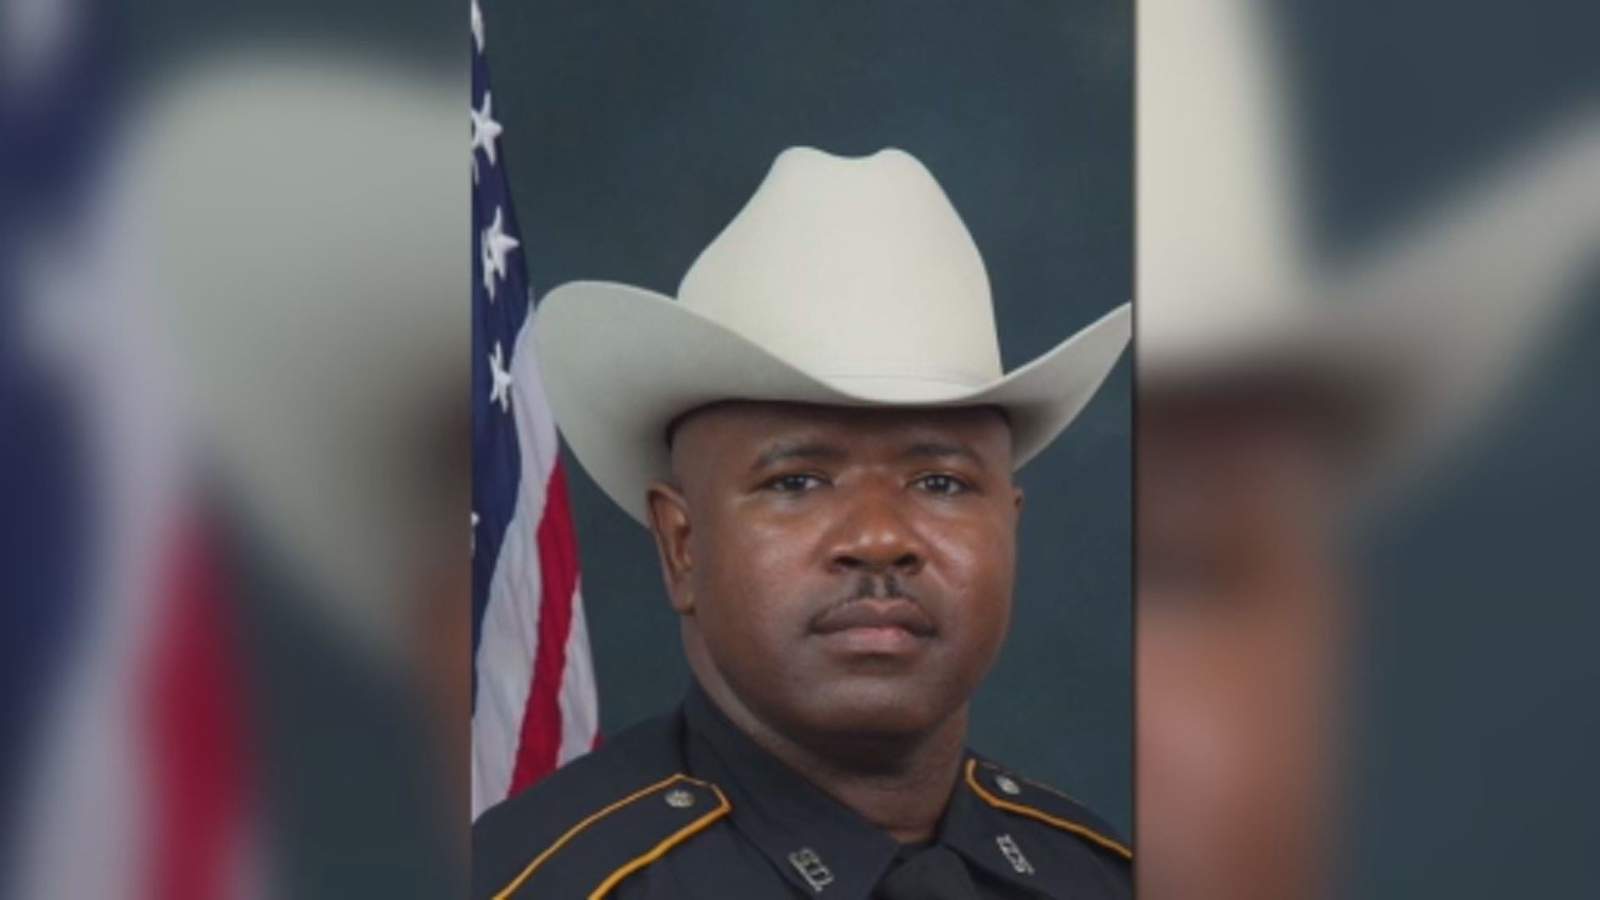 ‘A great man of faith: Harris County says goodbye to sheriff’s sergeant killed in crash